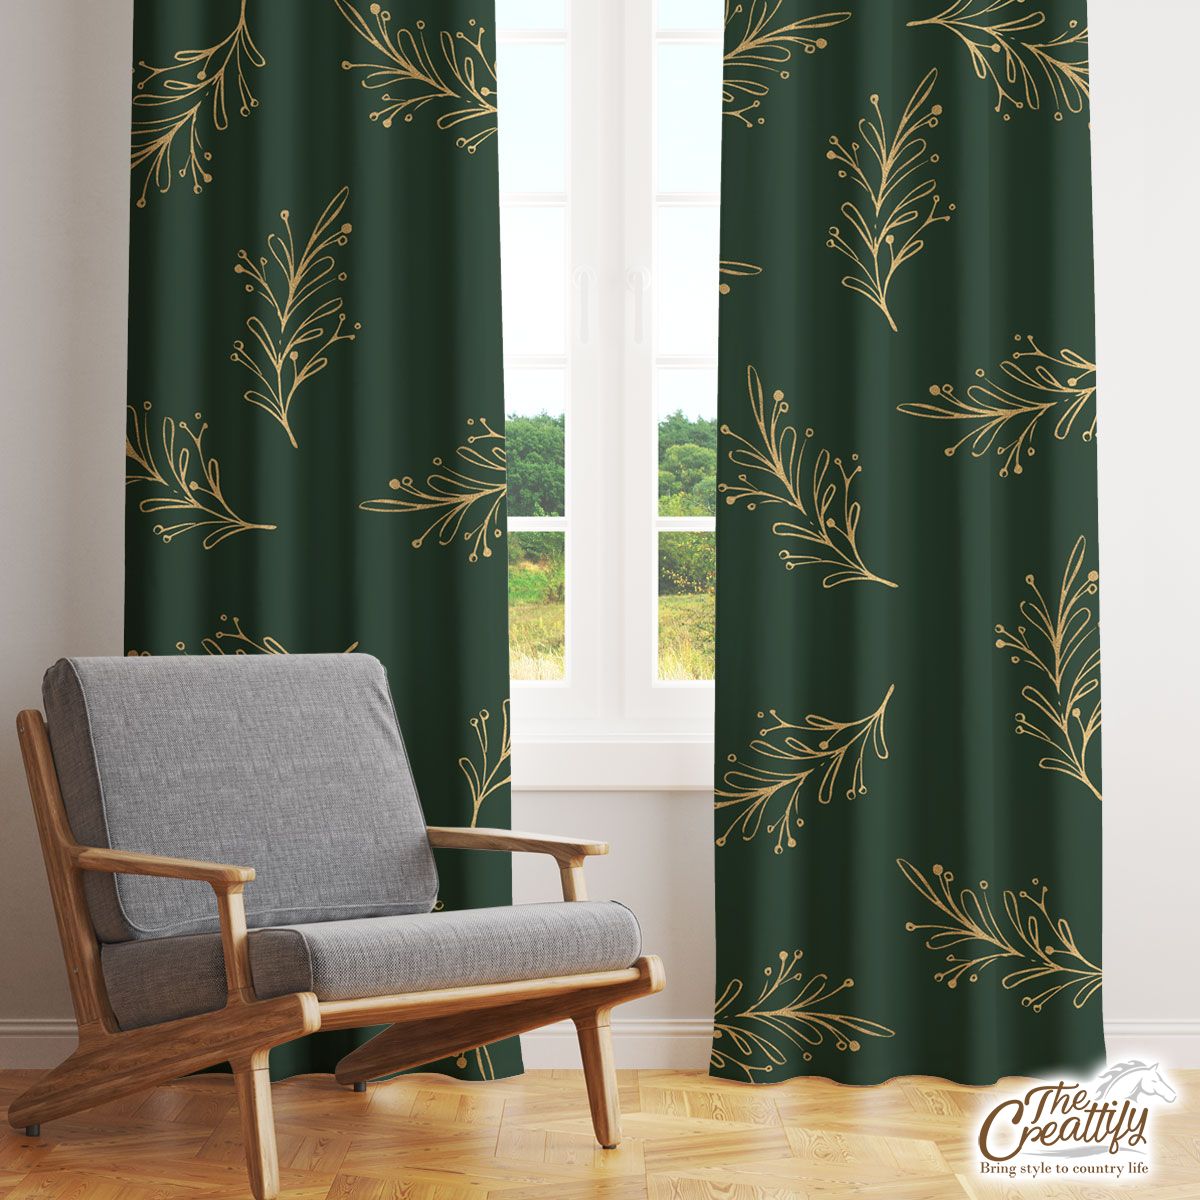 Gold And Green Christmas Tree Branch Window Curtain